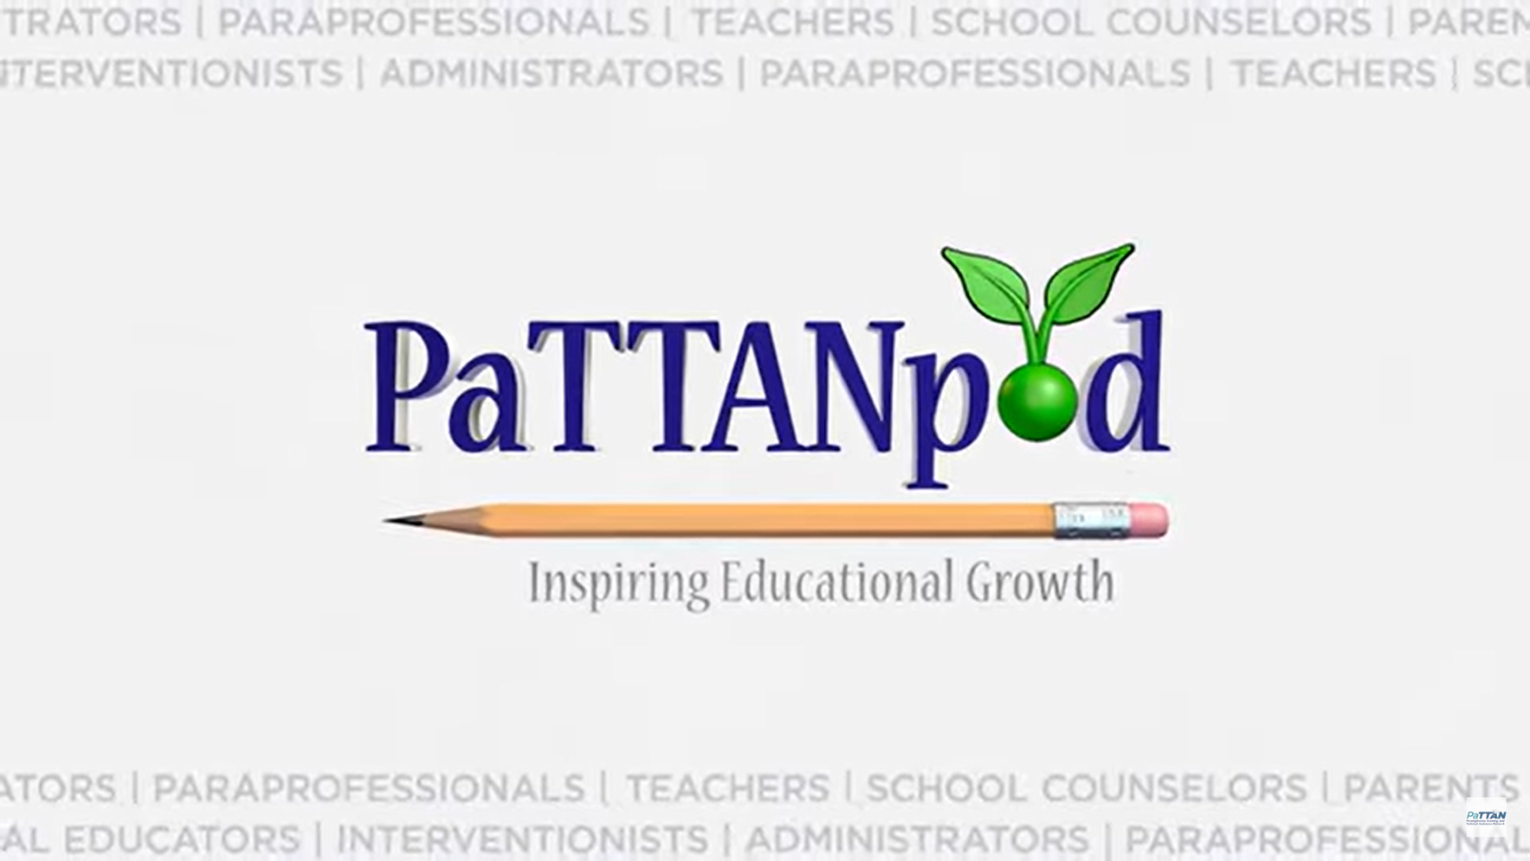 Decorative picture that says PATTANPod and links to the Pattan Pod webpage